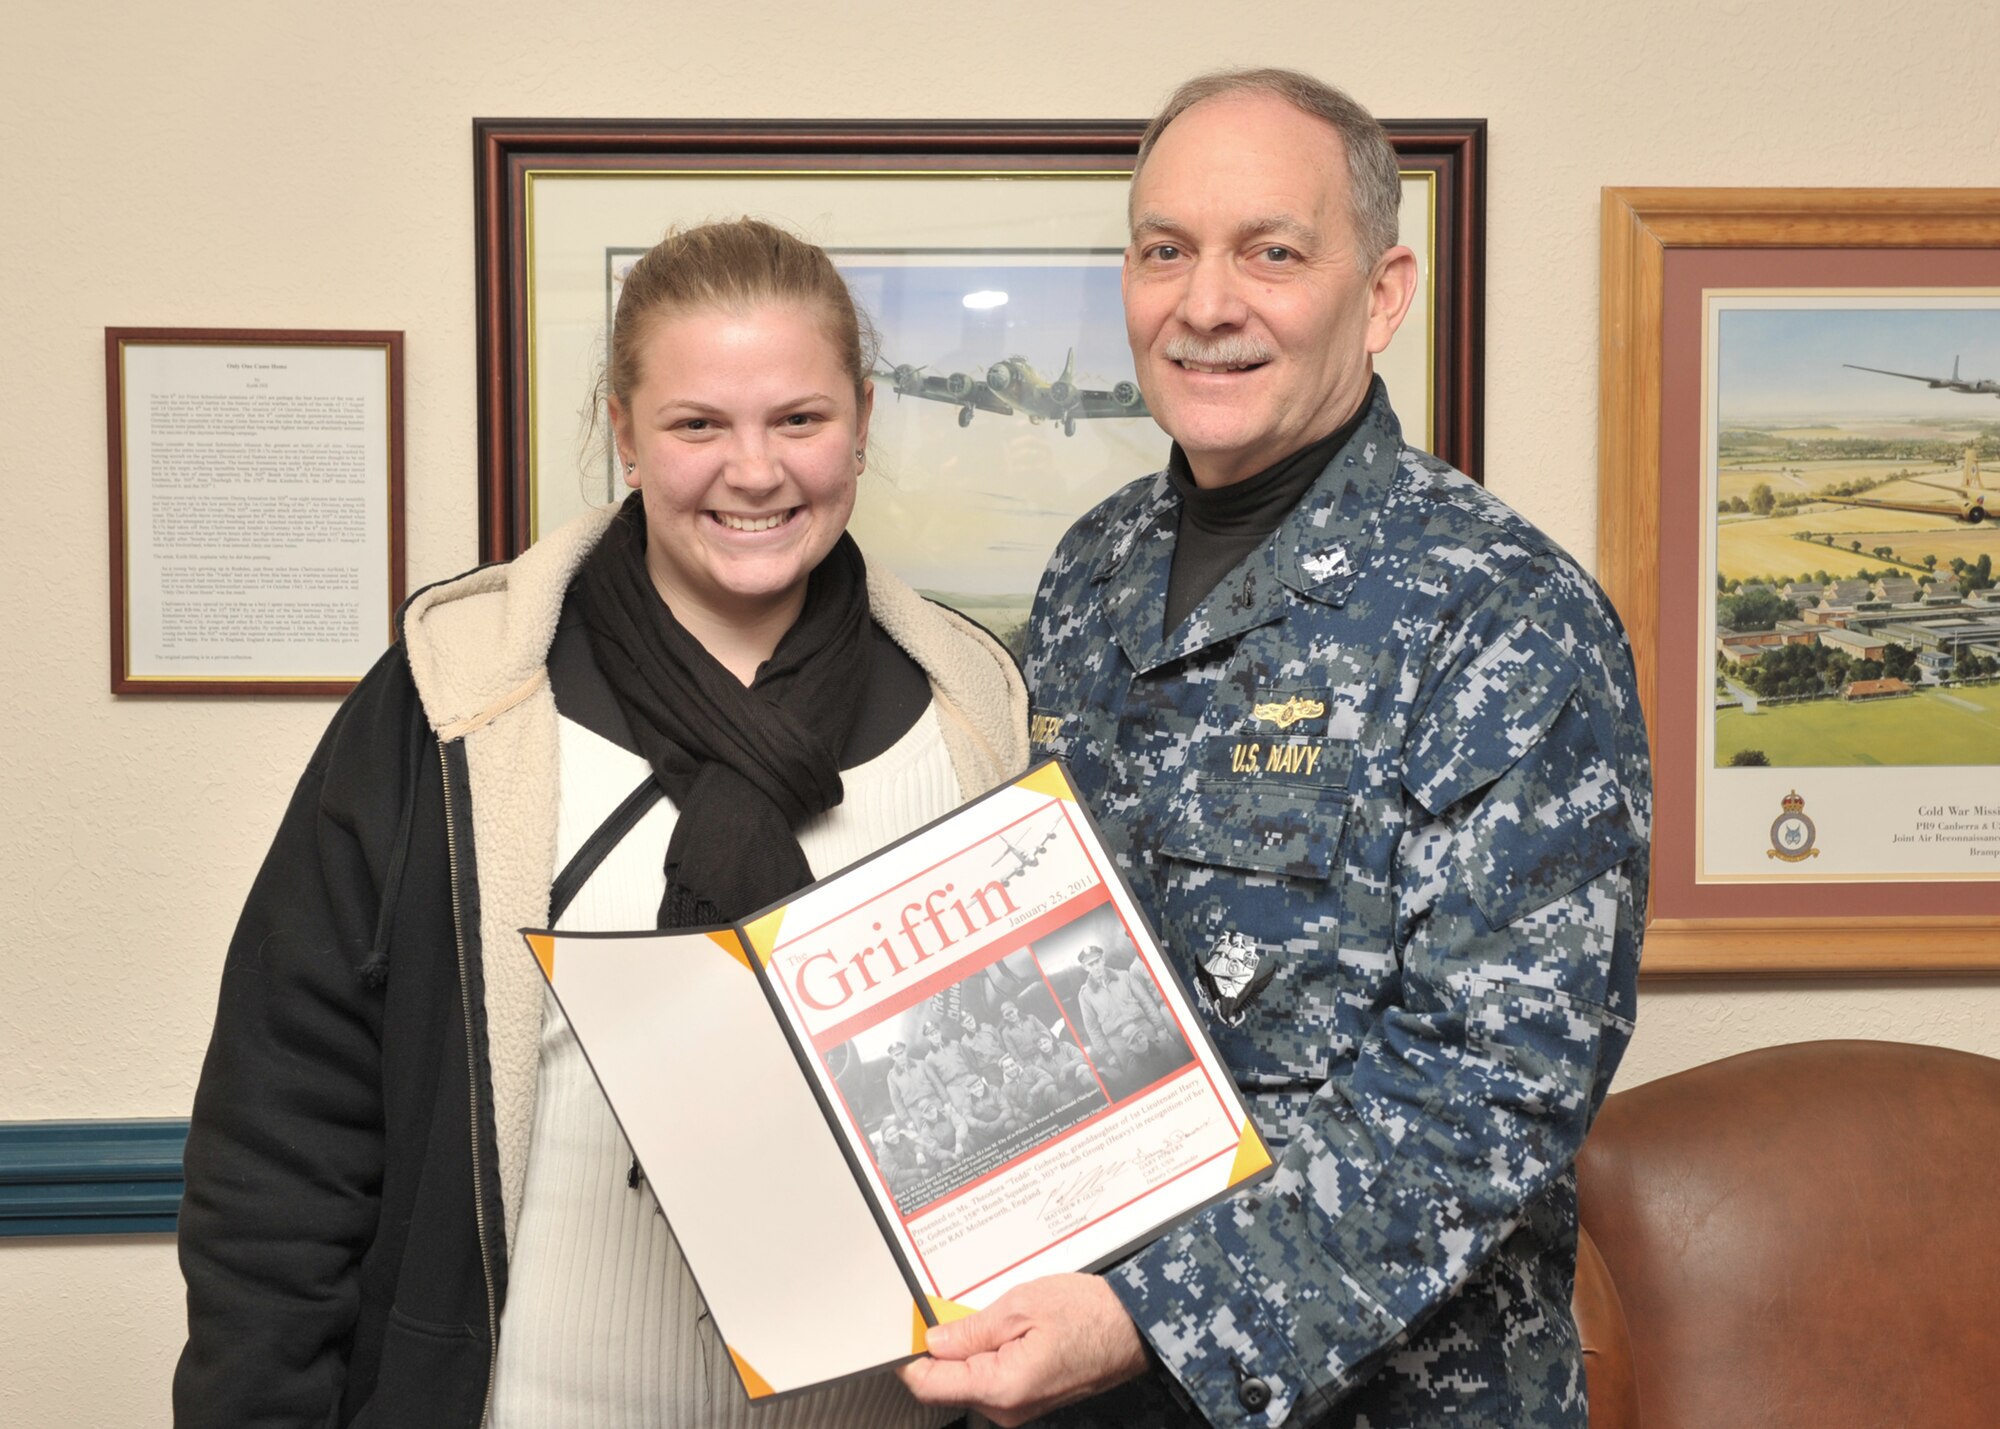 Navy Captain Gary S. Powers, Deputy Commander of the JIOCEUR Analytic Center at RAF Molesworth presents a special certificate to Ms. Theodora “Teddi” Gobrecht commemorating her January 25, 2011 visit to the wartime home of the 303rd Bomb Group (Heavy). (U.S. Air Force photo by Staff Sgt. Javier Cruz)